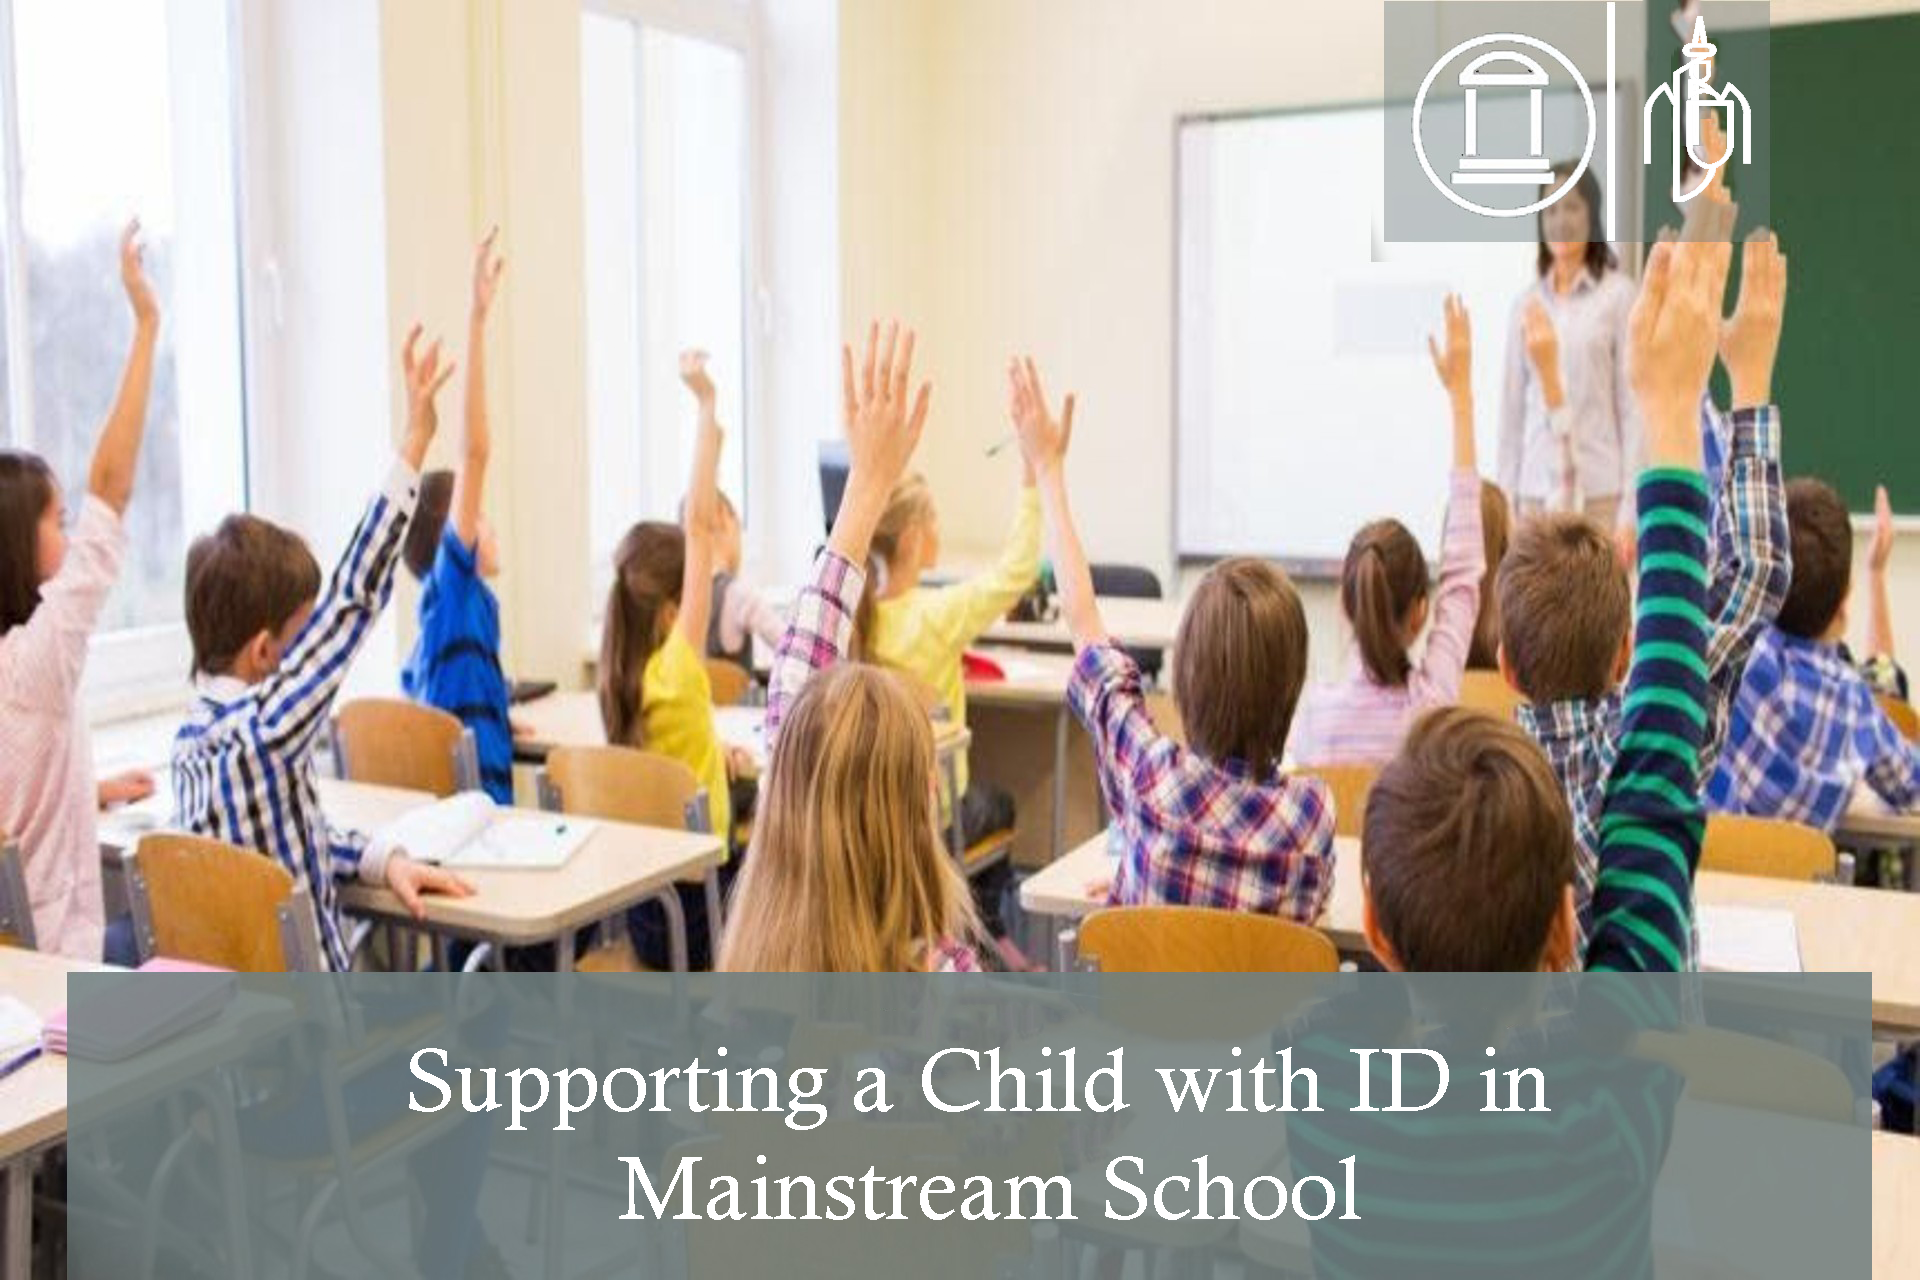 Supporting a Child with ID in Mainstream School